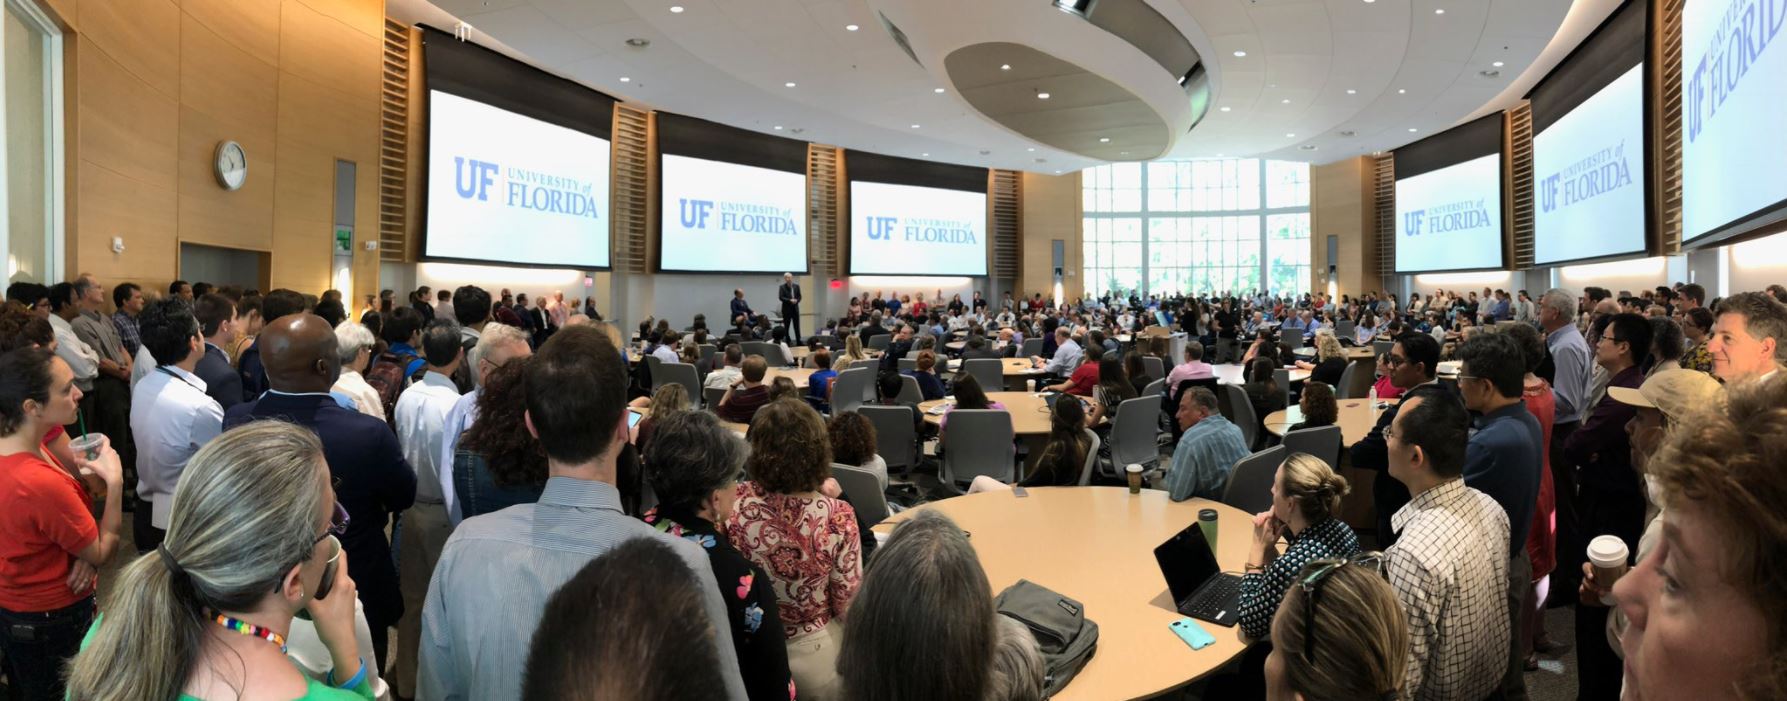 Francis Collins addresses a packed conference hall at the University of Florida